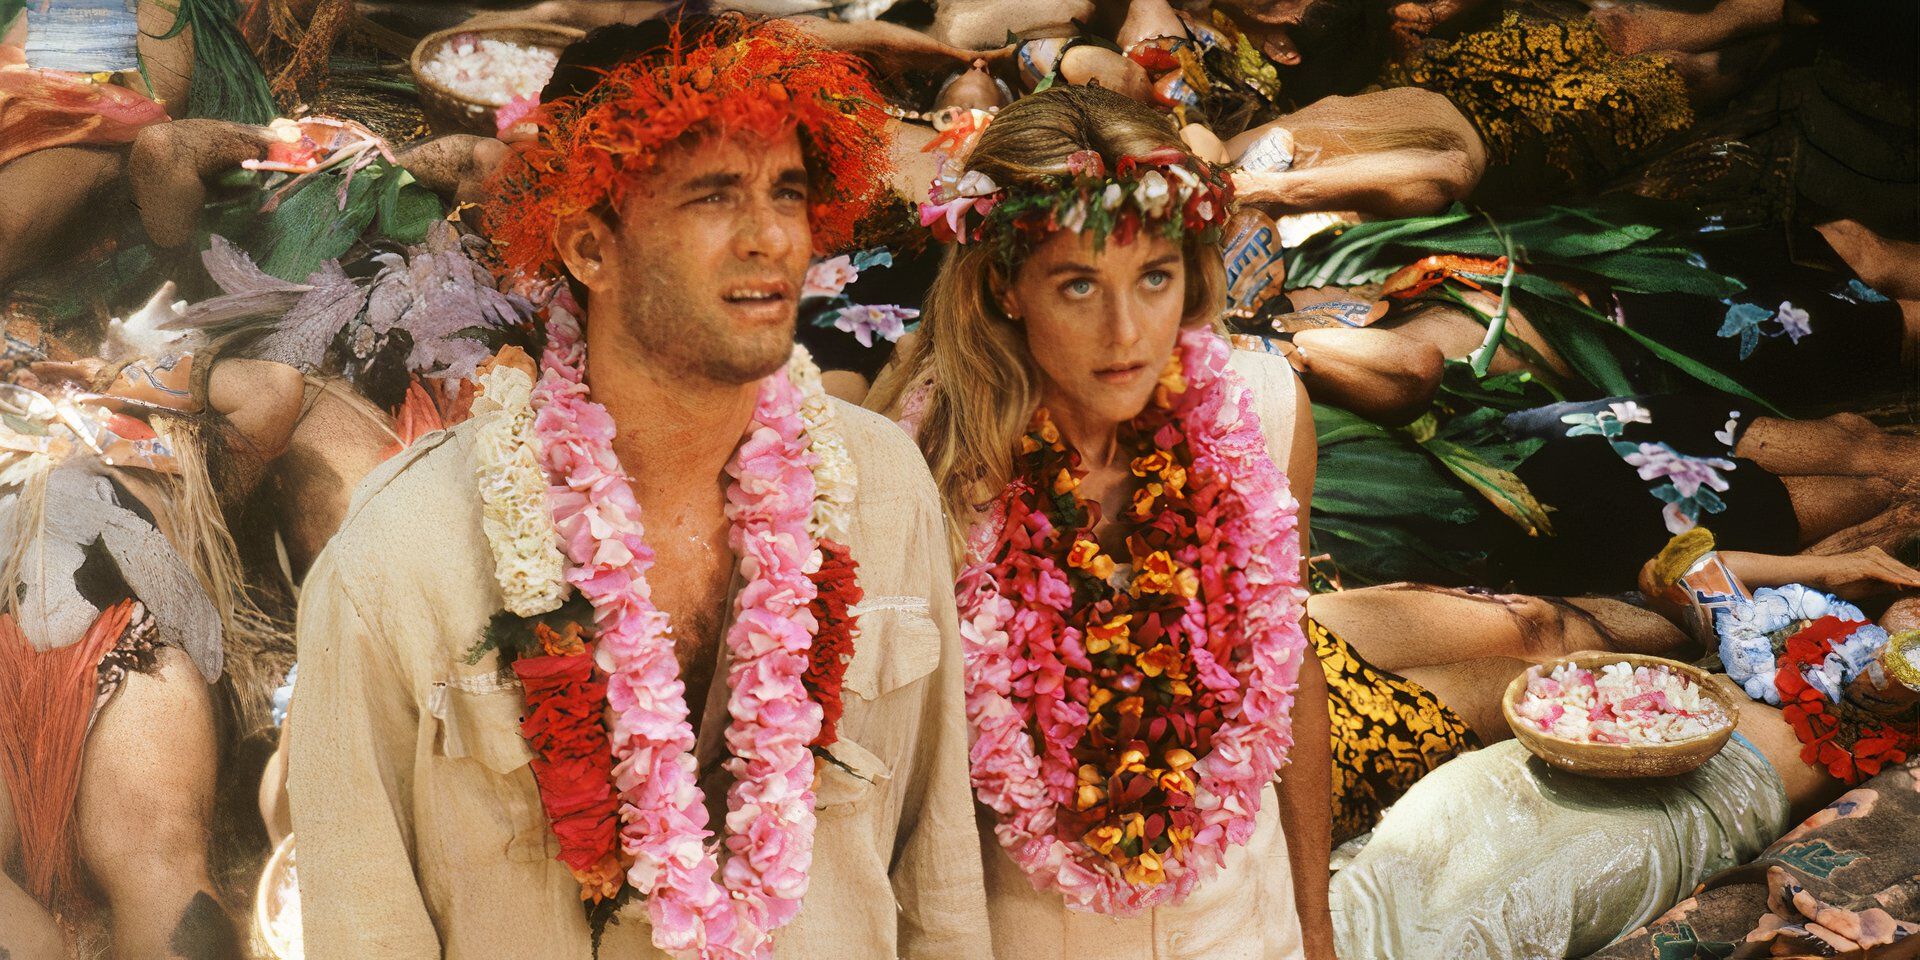 Joe and Patricia attending an island ceremony and covered in flower lei necklaces in 'Joe Versus the Volcano' (1990)